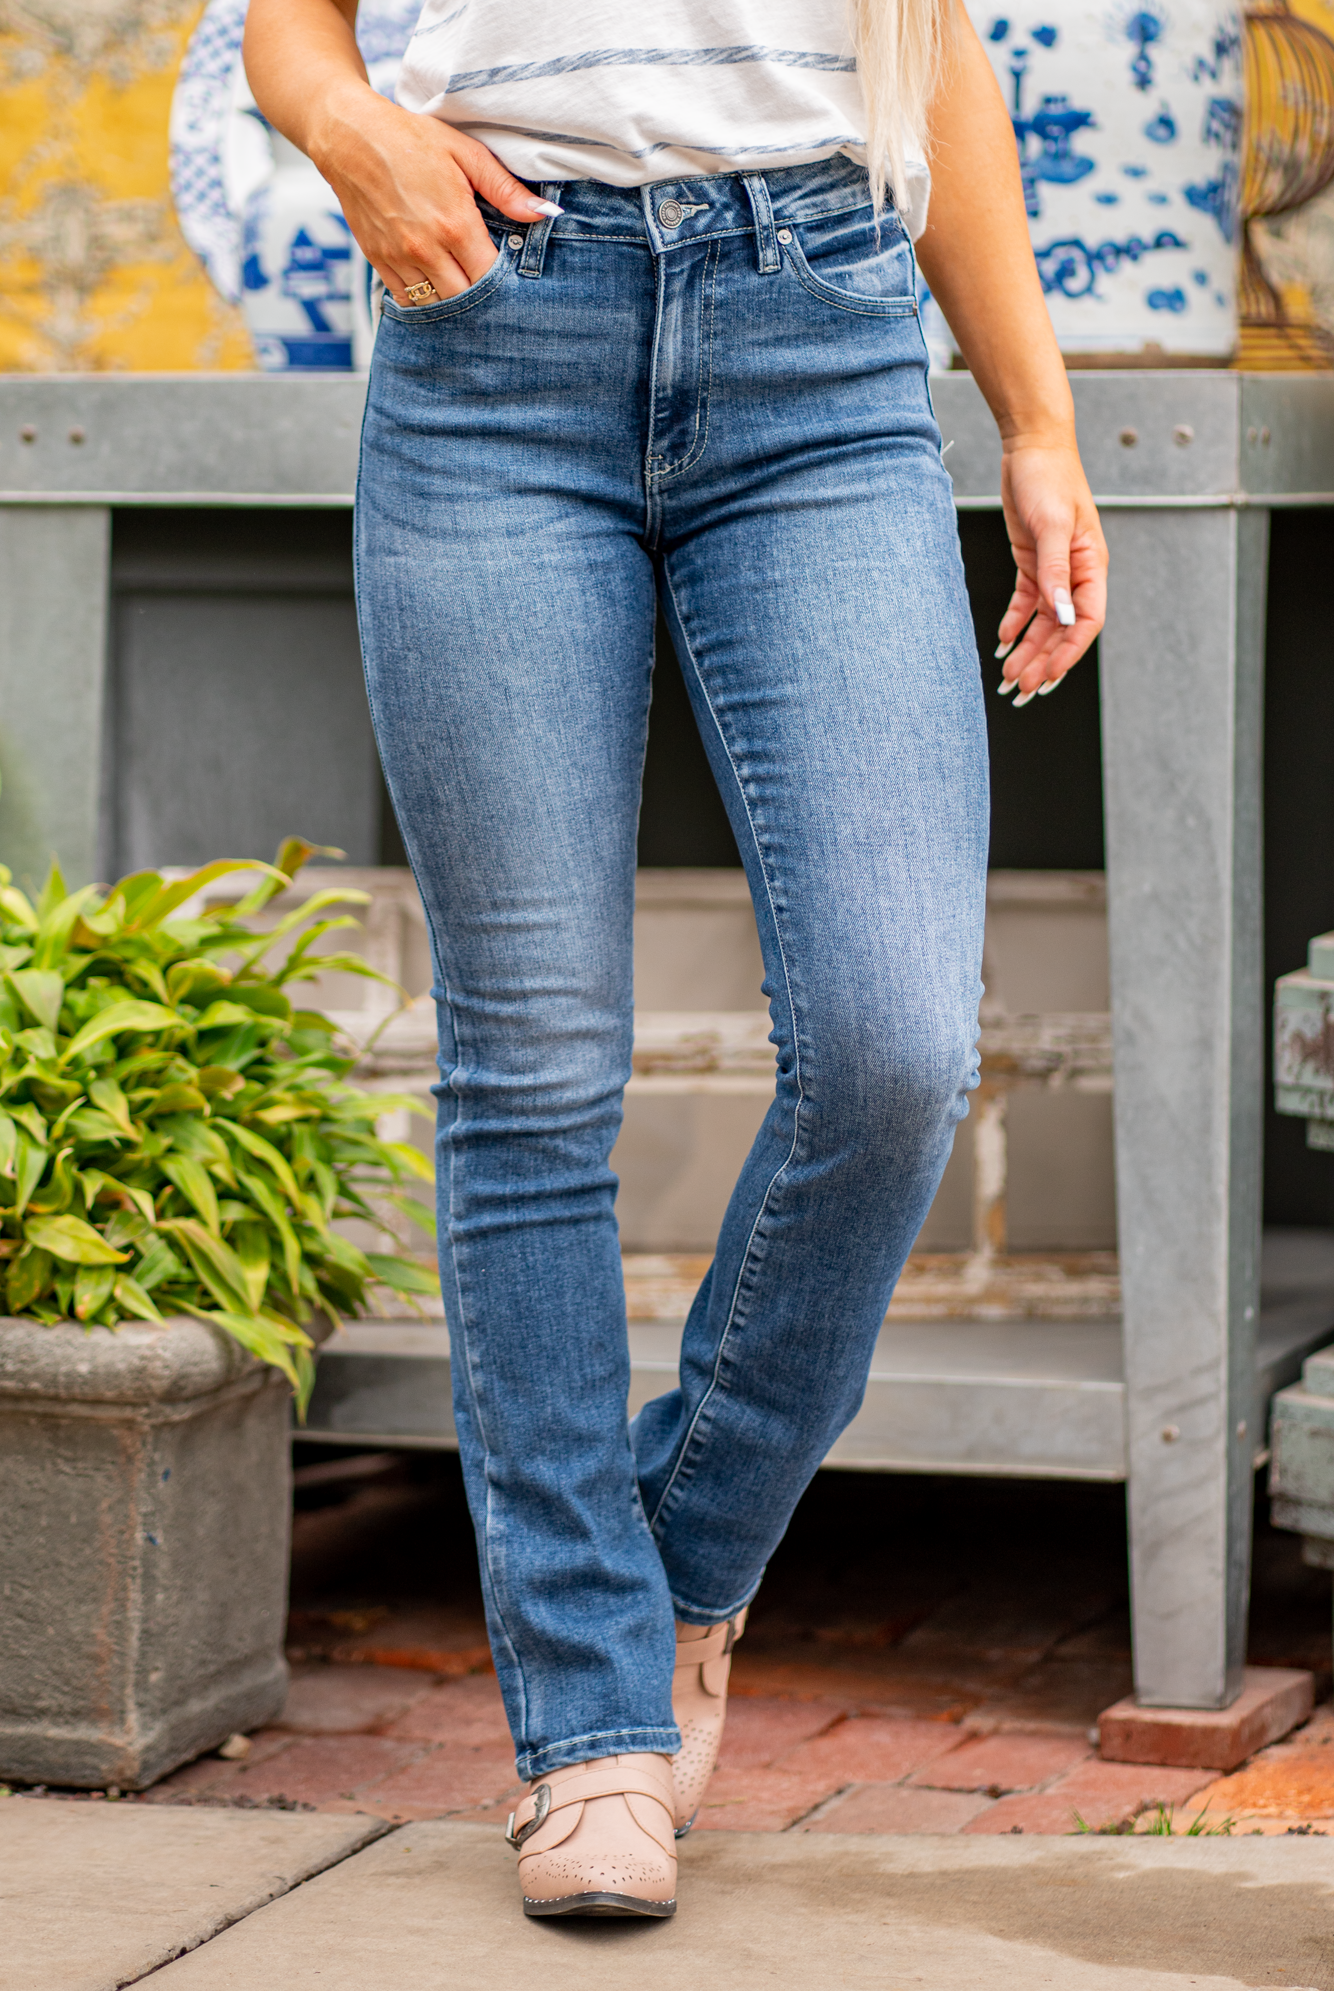 KanCan Jeans  KanCan Stretch Level: Stretchy  Color: Medium Blue Cut: Boot Cut, 32" Inseam* Rise: High-Rise, 10" Front Rise* 68% COTTON, 30% POLYESTER, 2%SPANDEX Stitching: Classic  Fly: Zipper Style #: KC8683M  Contact us for any additional measurements or sizing.  *Measured on the smallest size, measurements may vary by size.